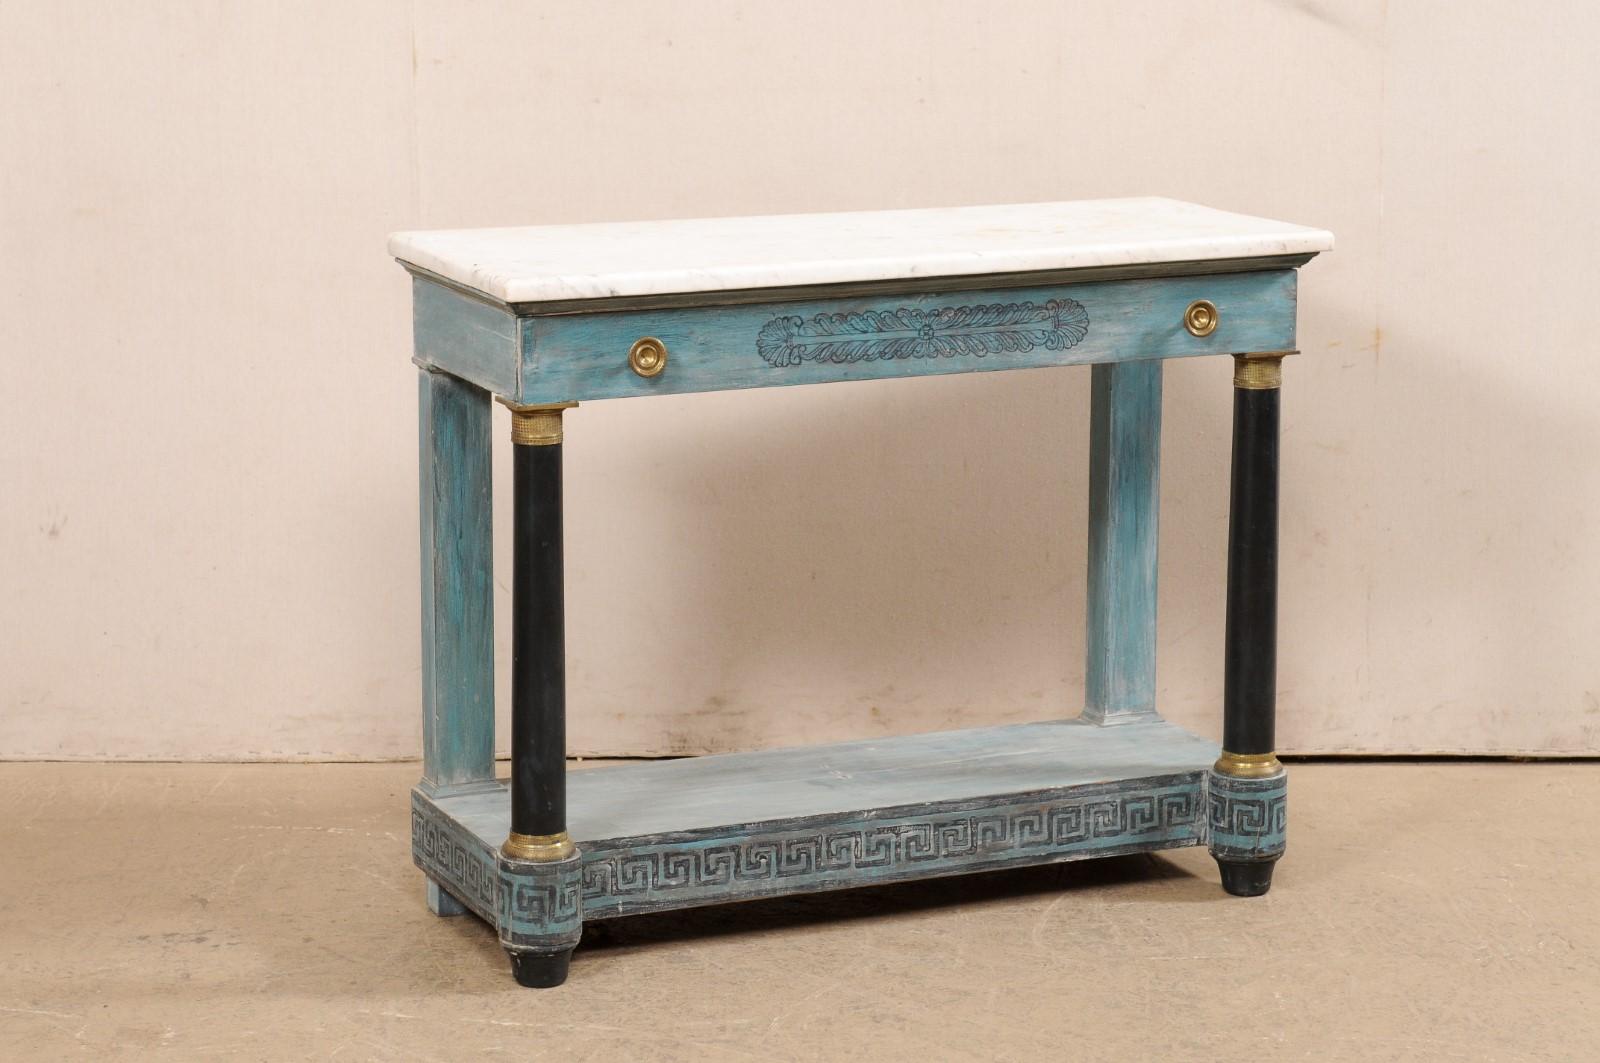 A French Neoclassical style painted wood console table, with marble top and Greek key motif, from the late 19th century. This antique table from France has been designed in neo-classical style, and features its original rectangular-shaped white